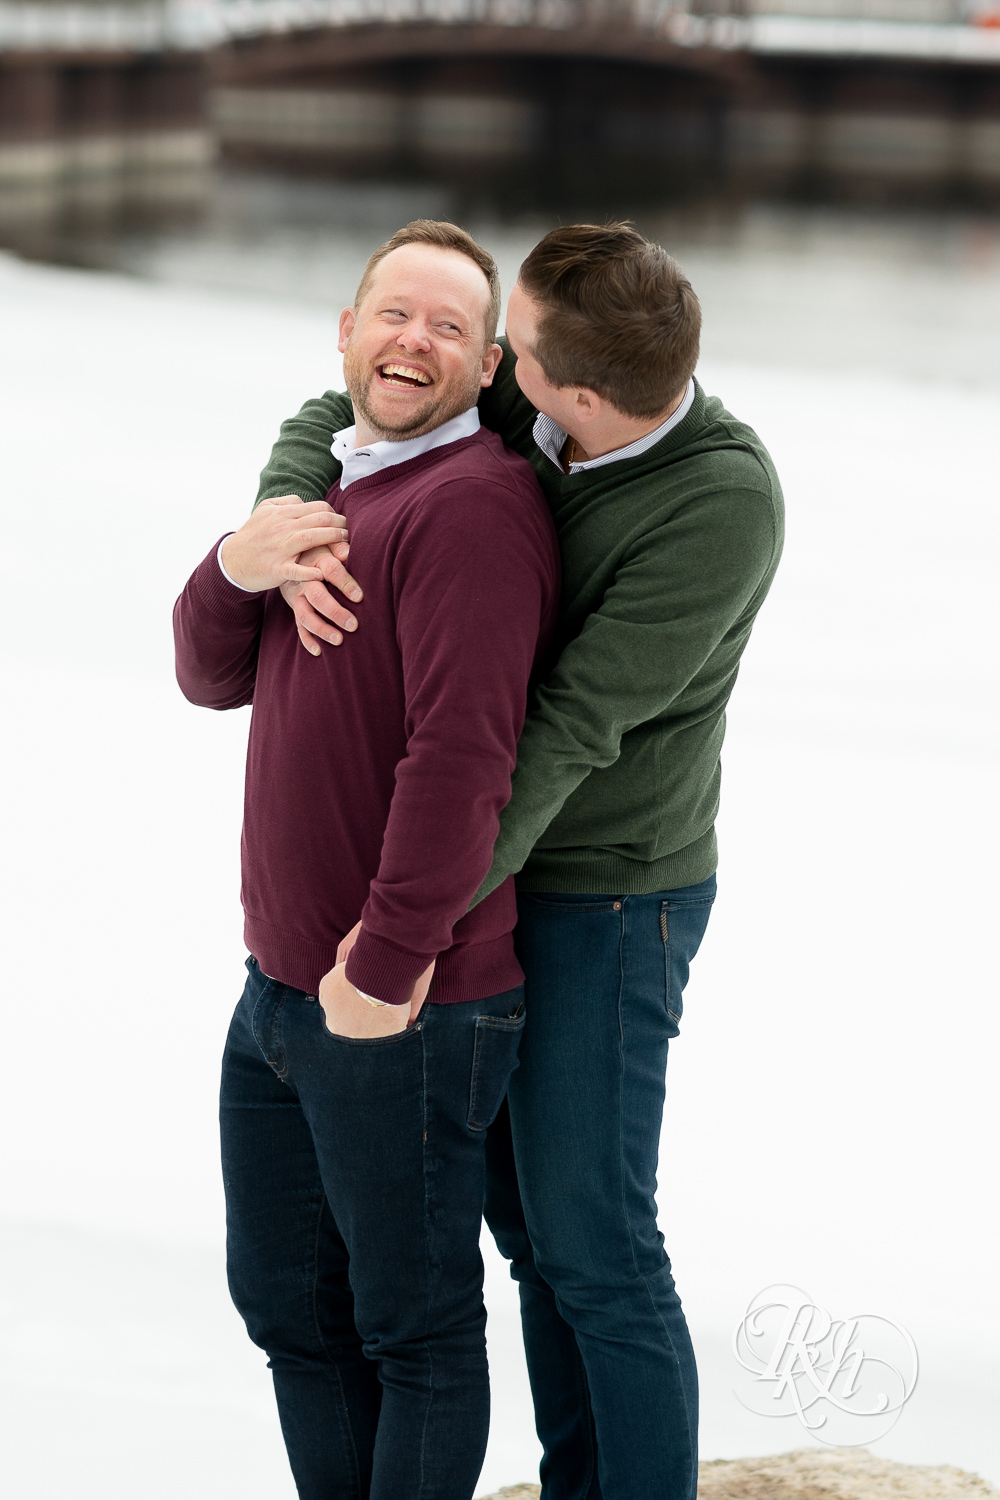 Gay men smile in snow during the winter in Minneapolis, Minnesota with city in background.